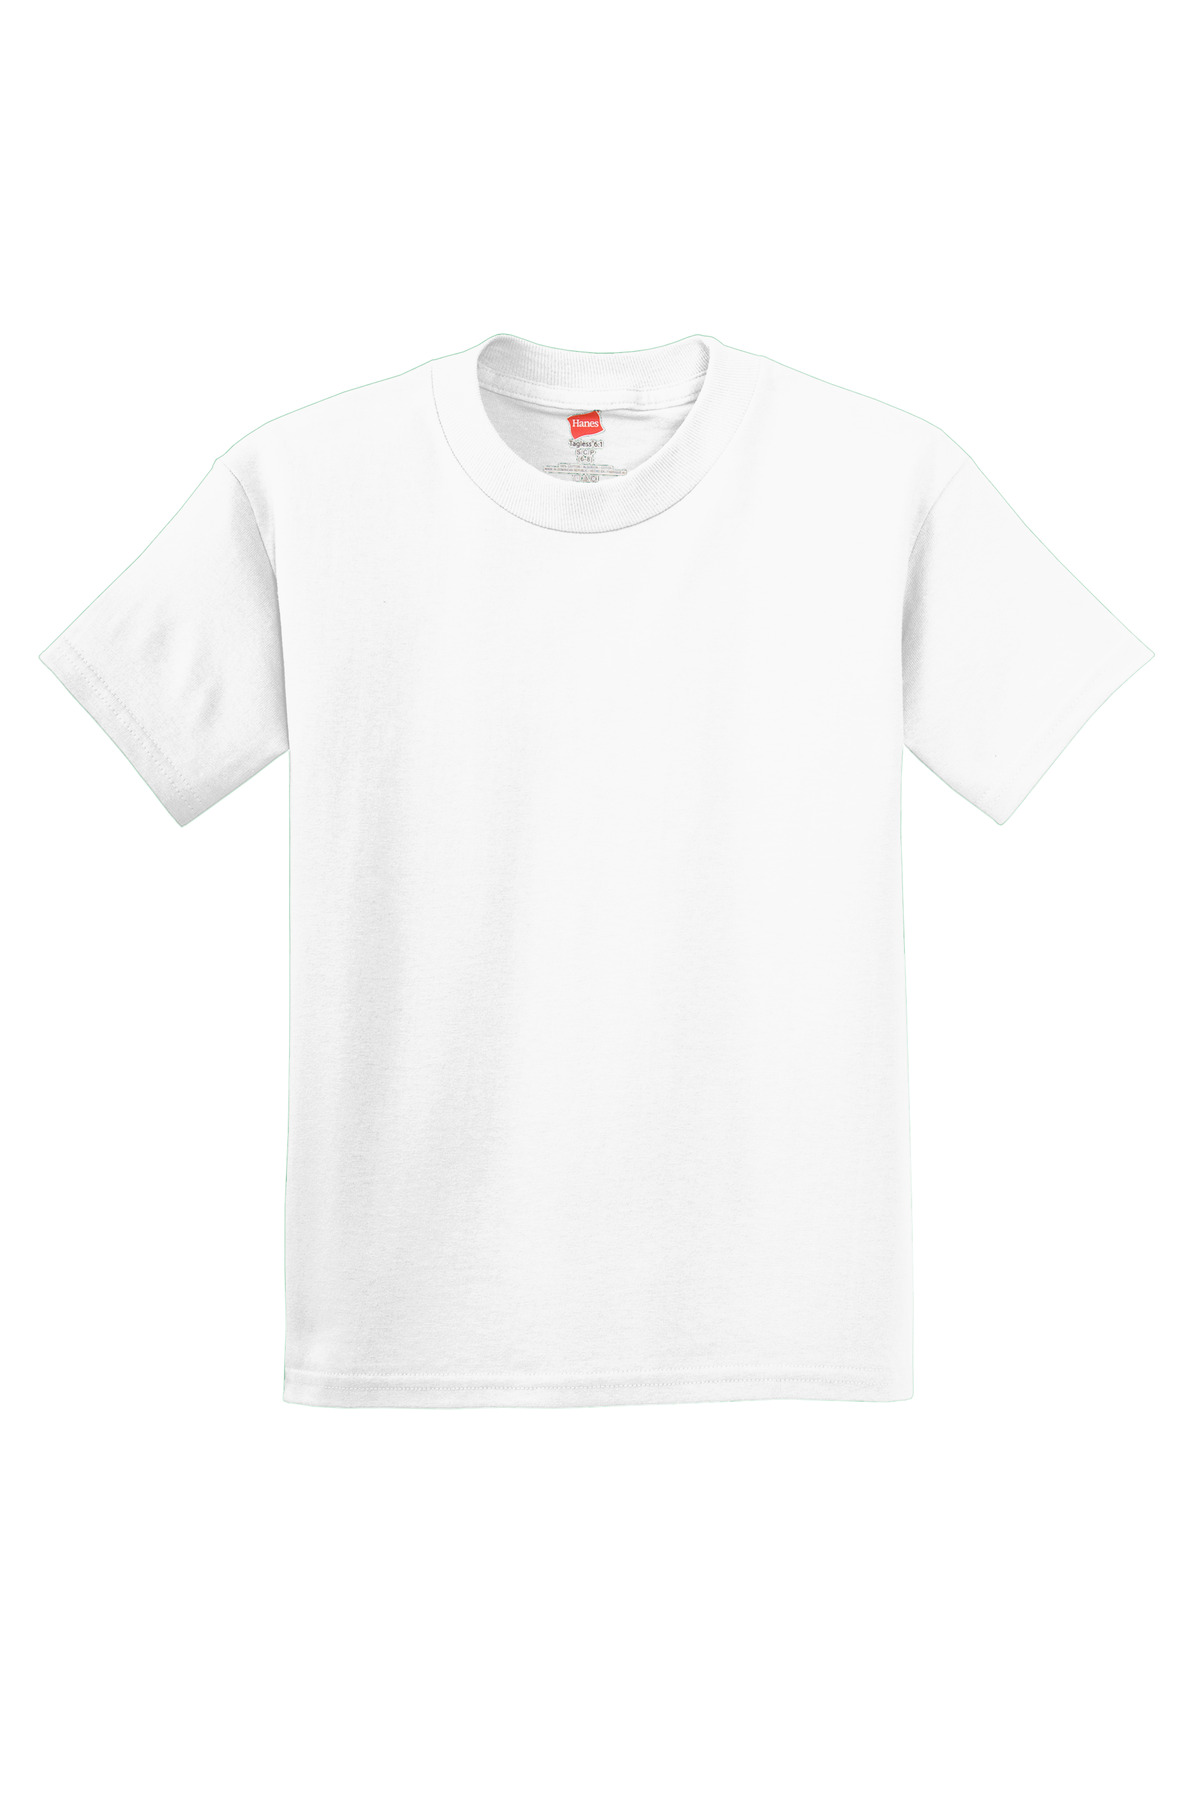 Hanes - Youth Authentic 100% Cotton T-Shirt-Hanes